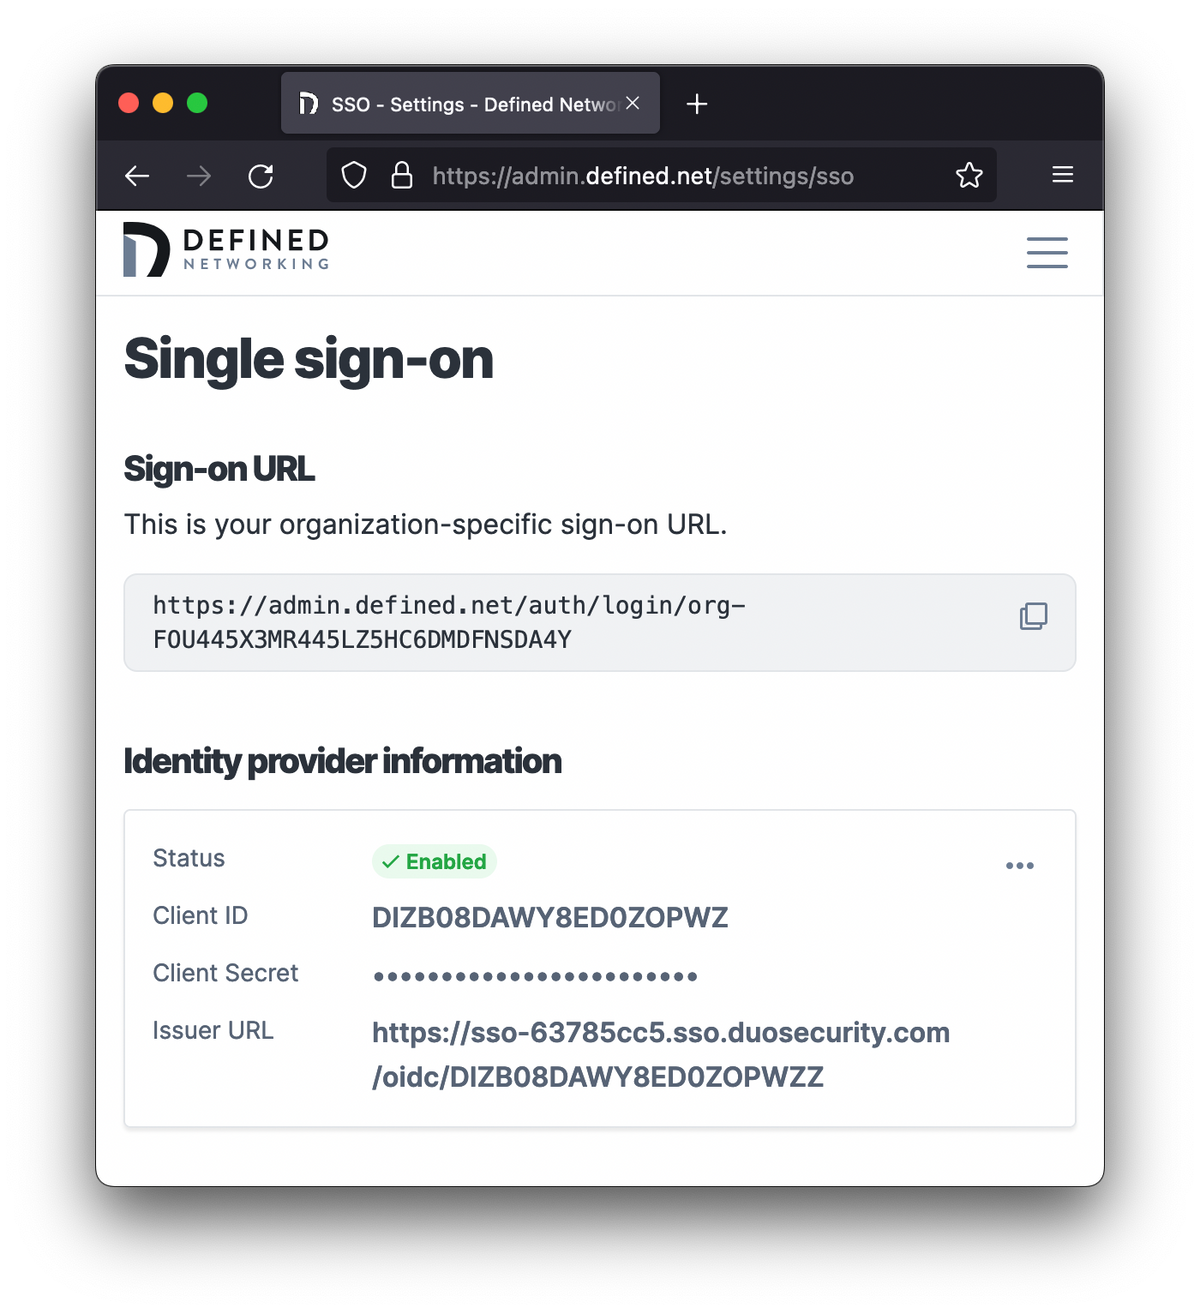 Saved SSO integration that shows a sign-on URL, and a details for a configured identity provider